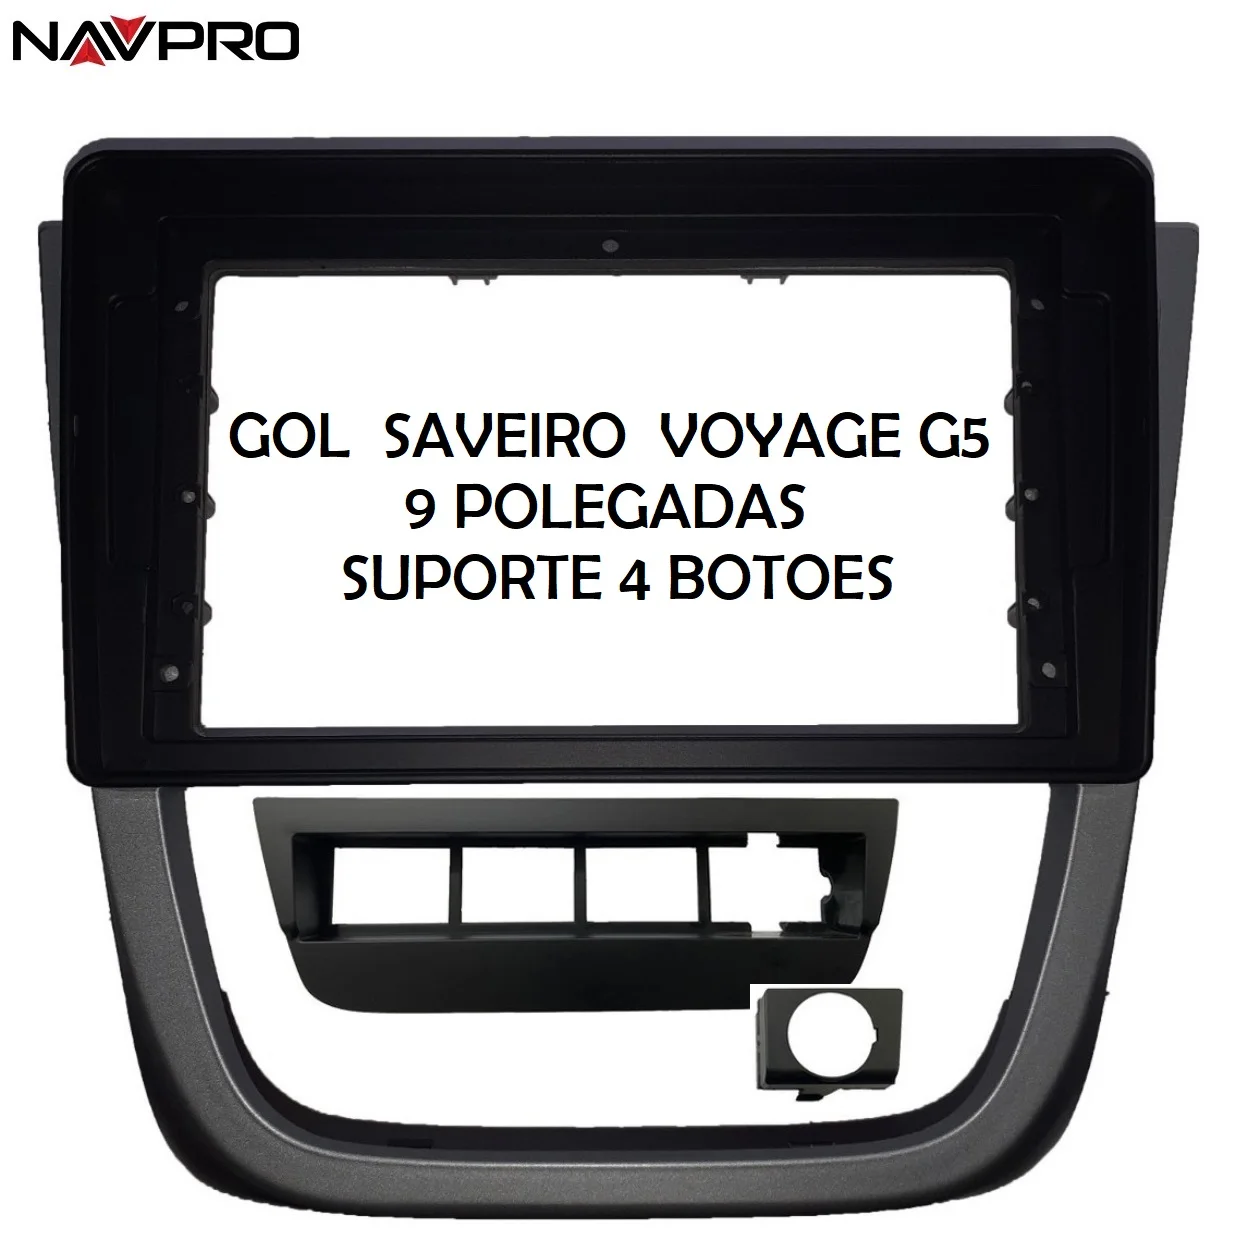 

VW GOL VOYAGE SAVEIRO G5 Frame/Fascia and connecting cables for installation of multimedia center 9 "NAVPRO CASKA